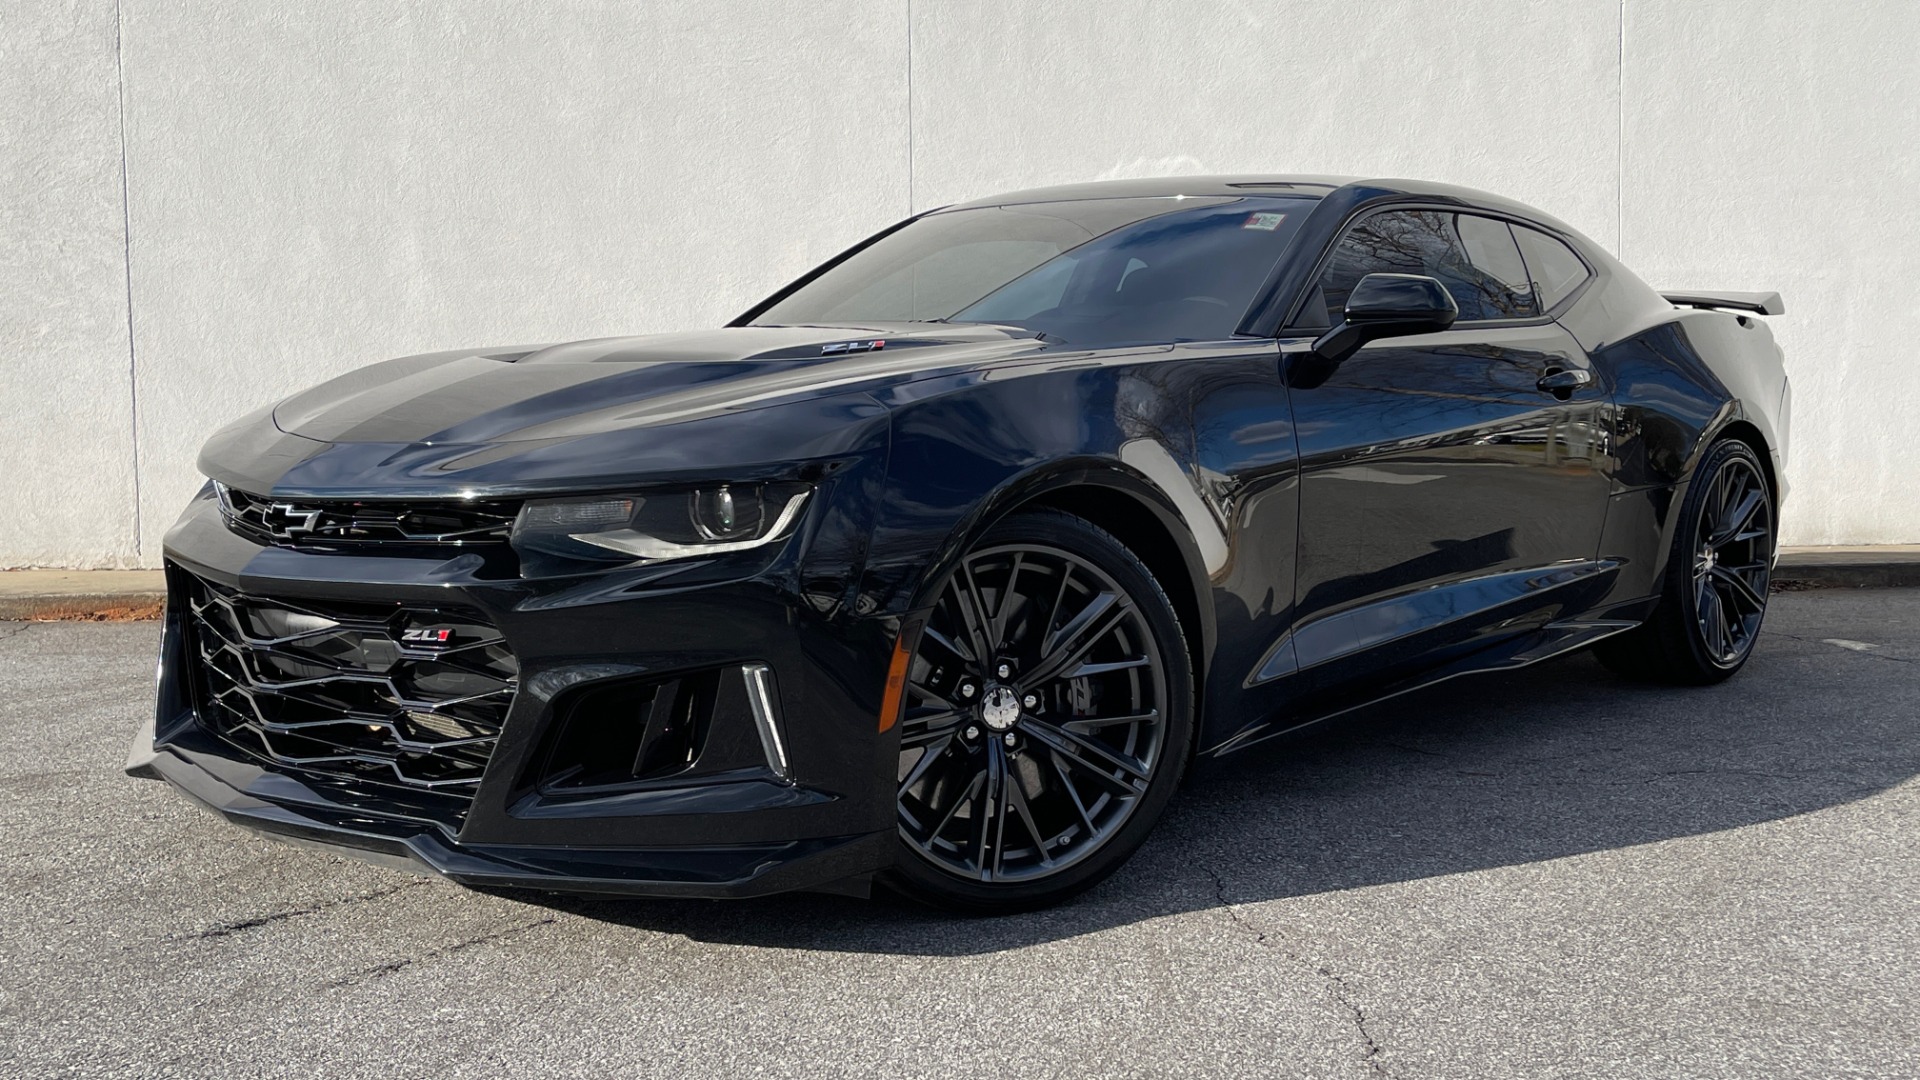 Used 2019 Chevrolet Camaro ZL1 650HP COUPE / 10-SPD AUTO / SUNROOF / BOSE / DATA RECORDER for sale Sold at Formula Imports in Charlotte NC 28227 1